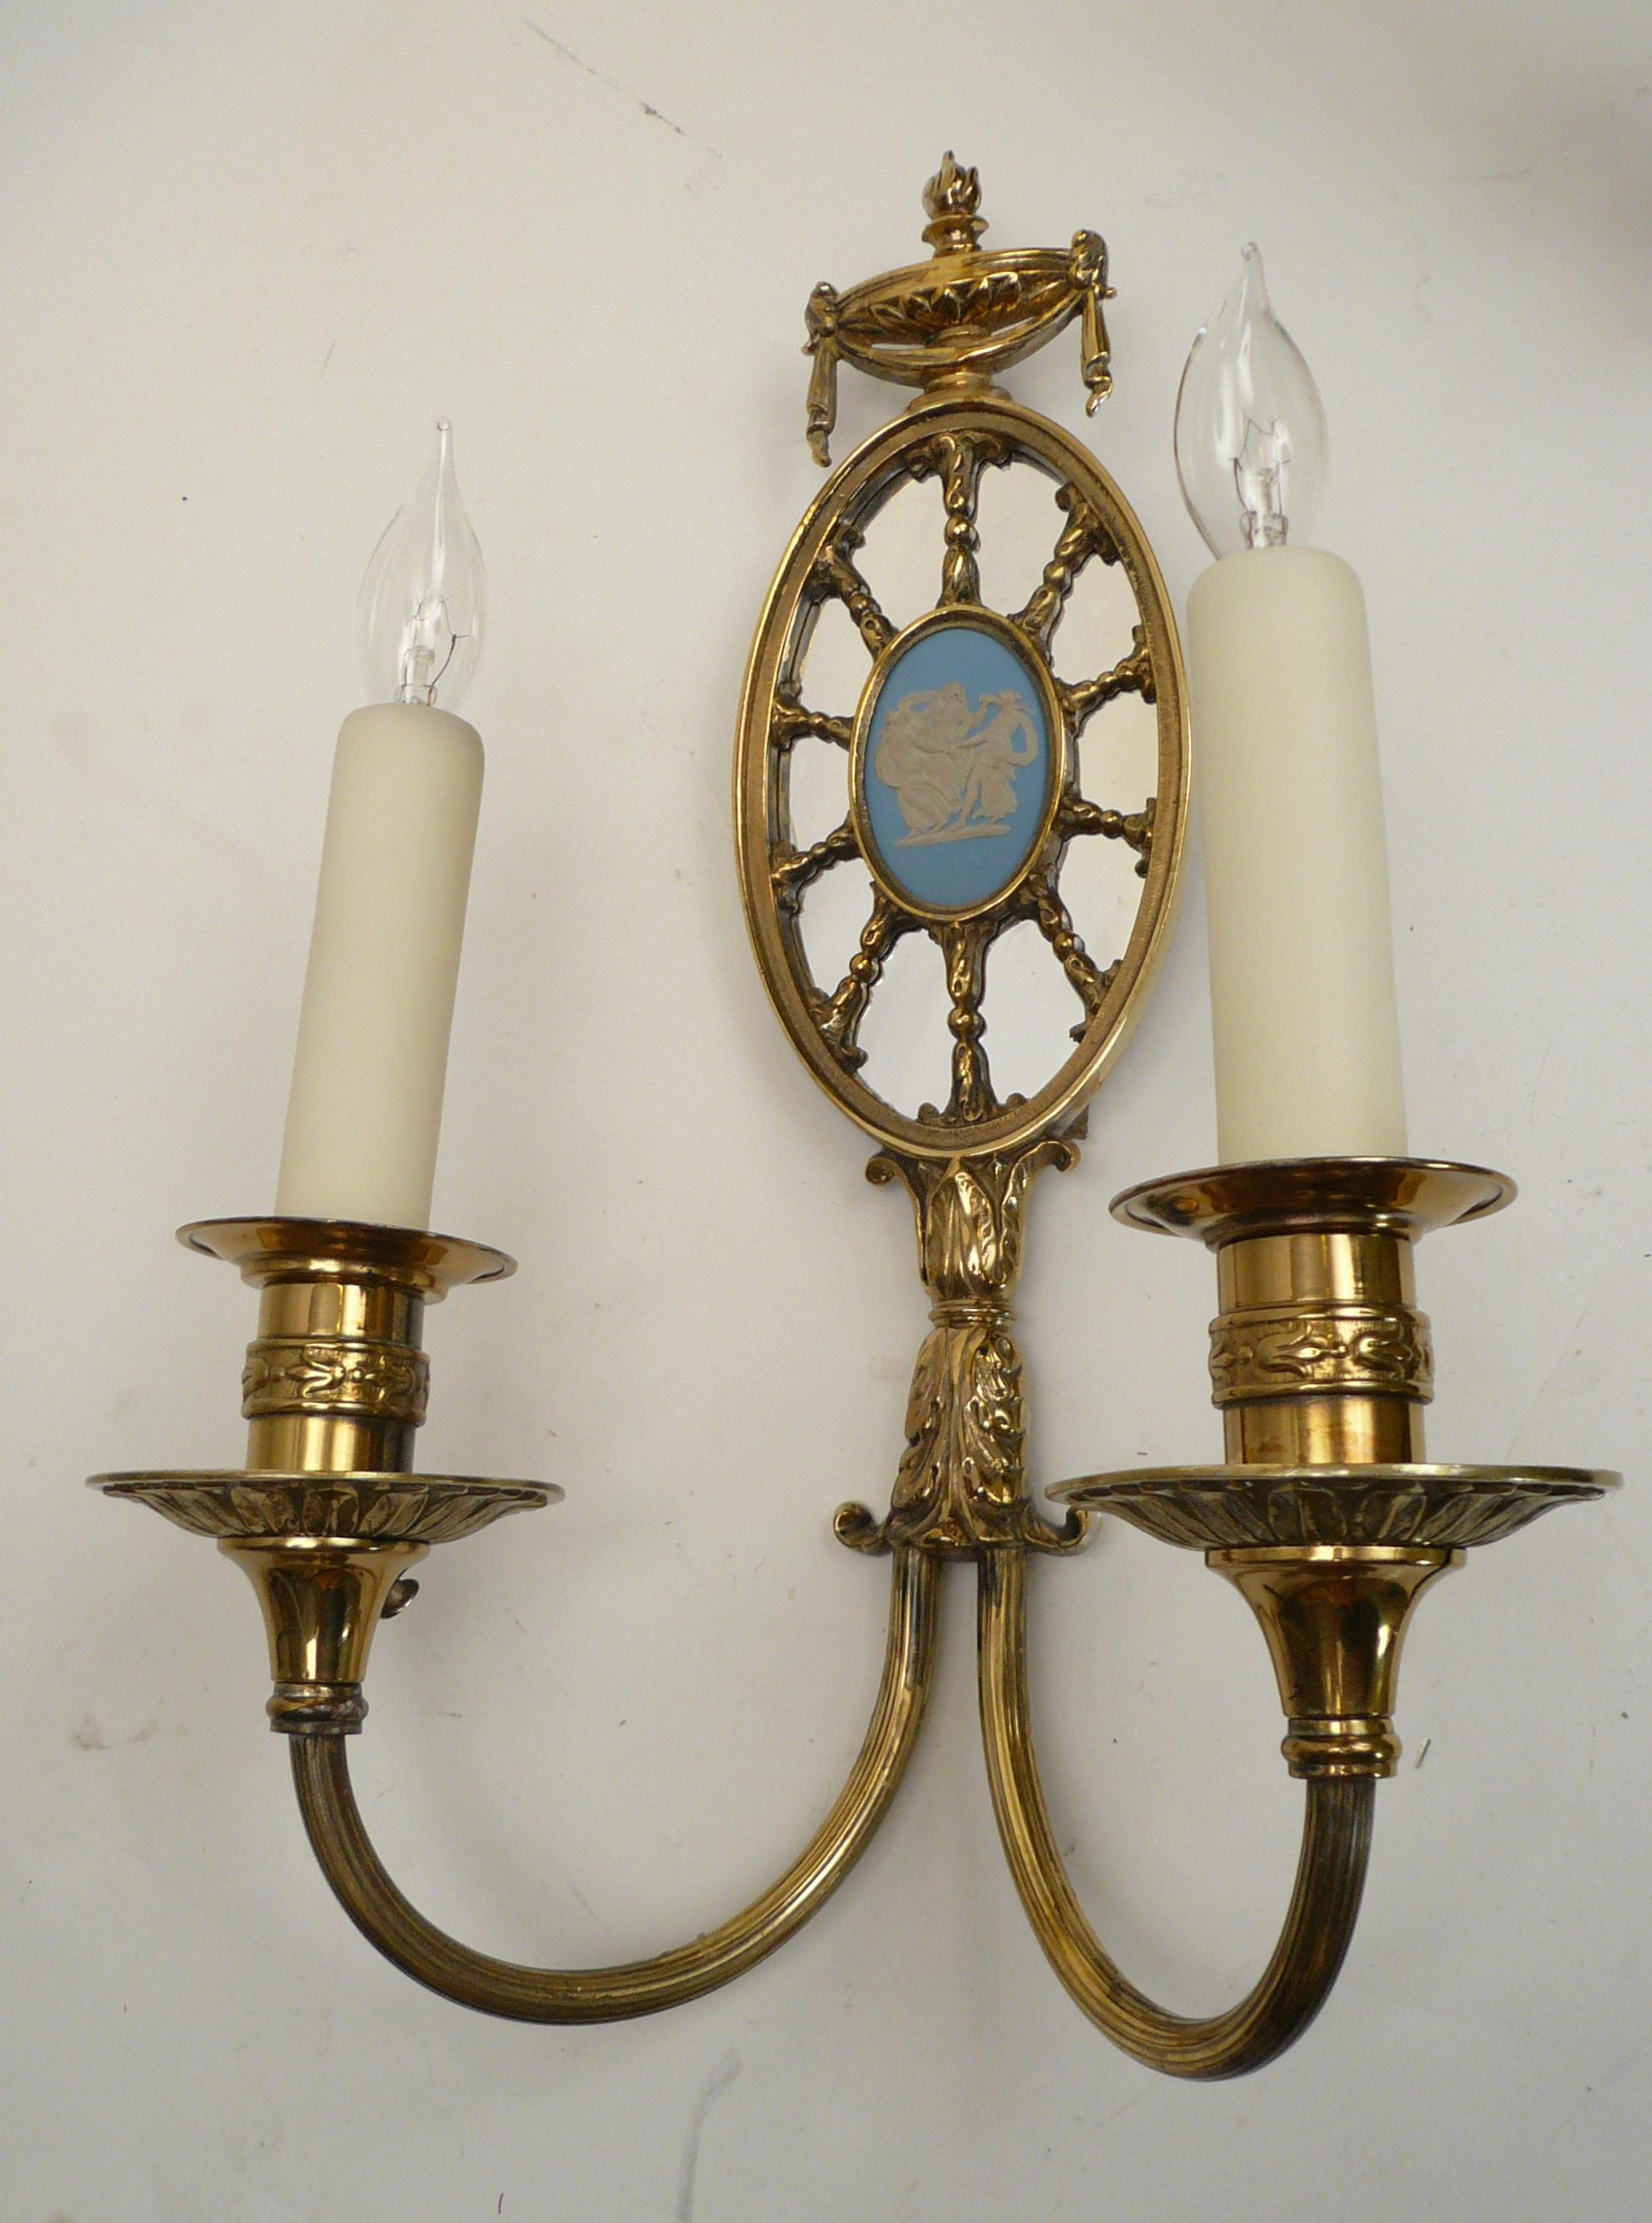 These handsome Robert Adam style sconces feature Classical motifs including urns, swags, and acanthus leaves. They are mounted with signed Wedgwood jasperware oval plaques.